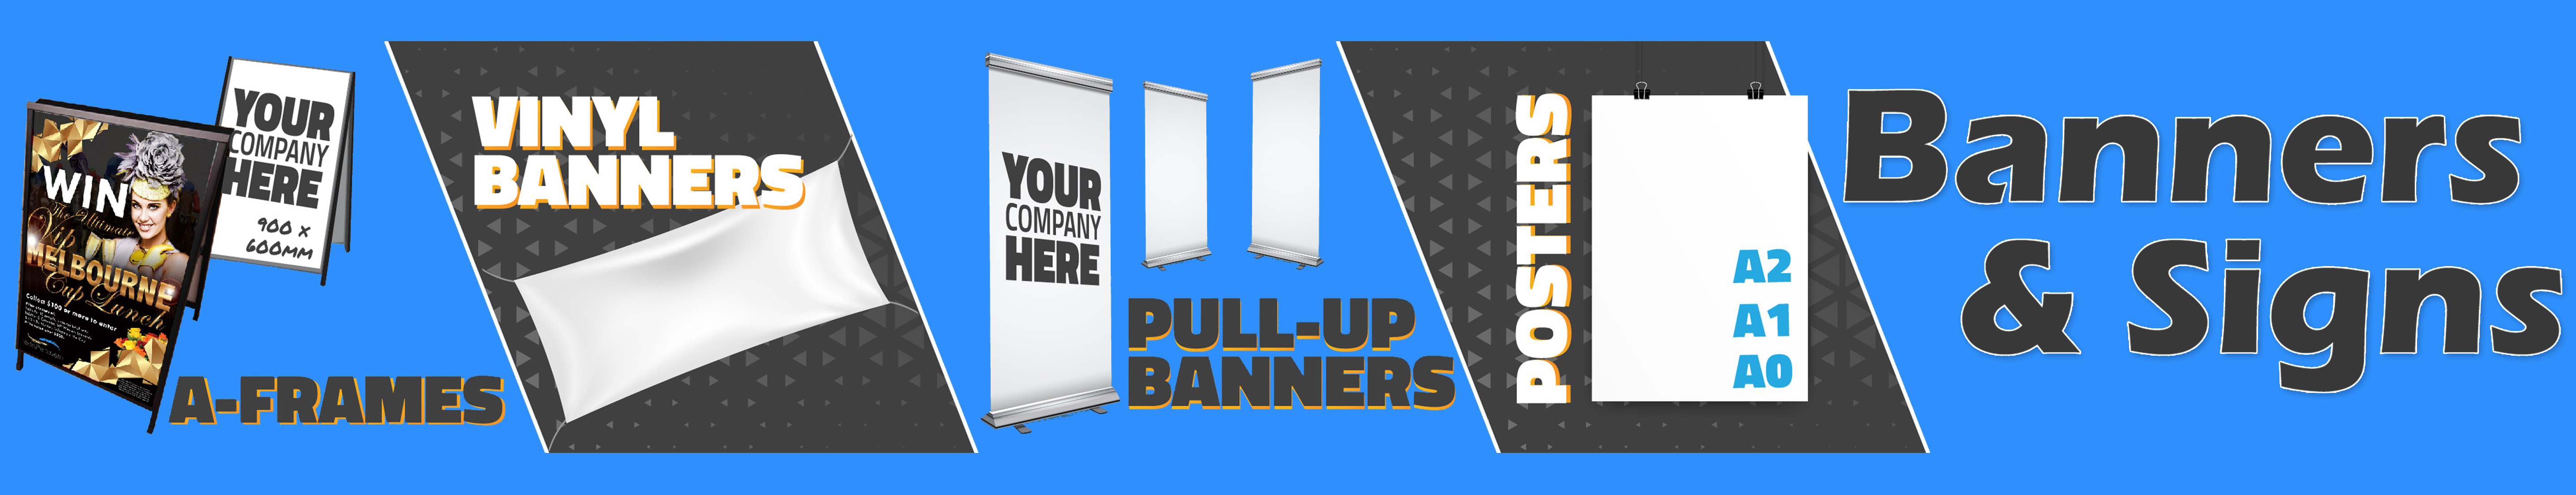 Banners And Signs Printing In Huntington Beach CA FREE CUSTOM DESIGN